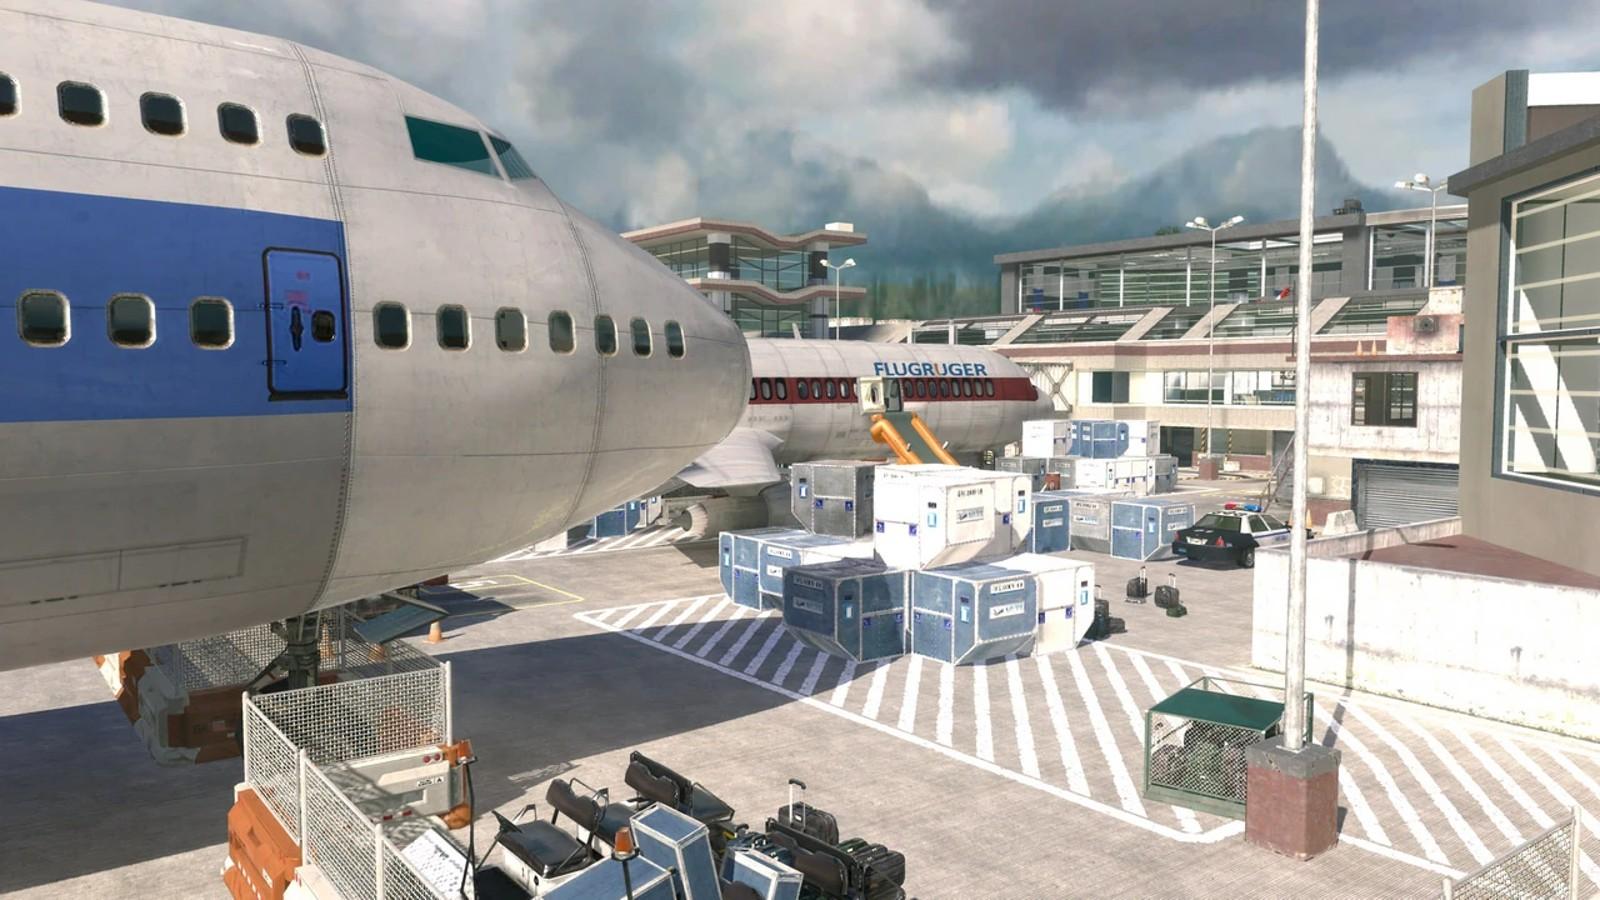 Call of Duty Modern Warfare 3 maps - All confirmed multiplayer maps